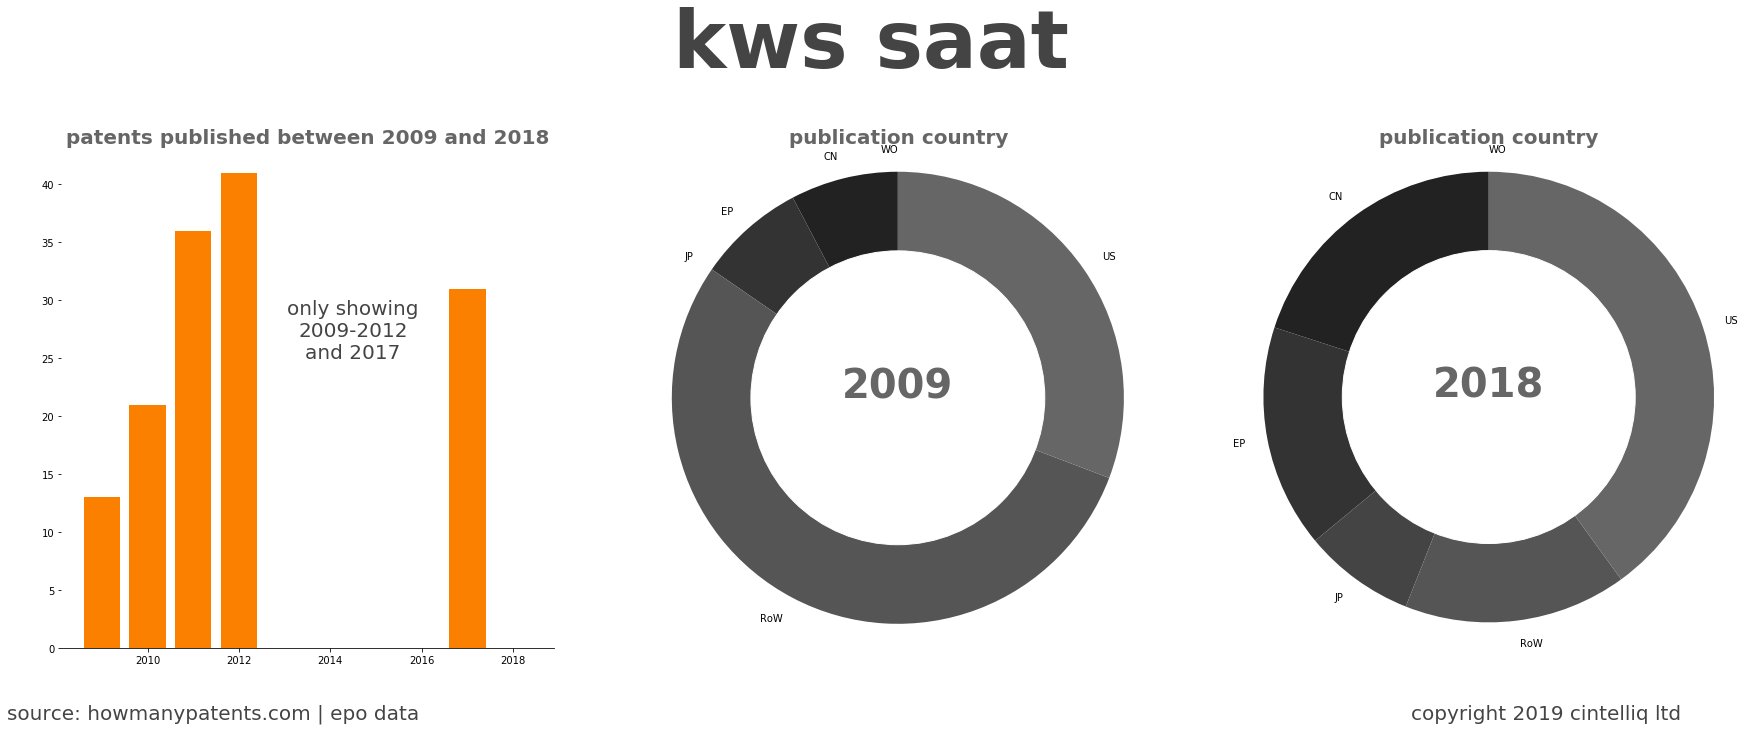 summary of patents for Kws Saat